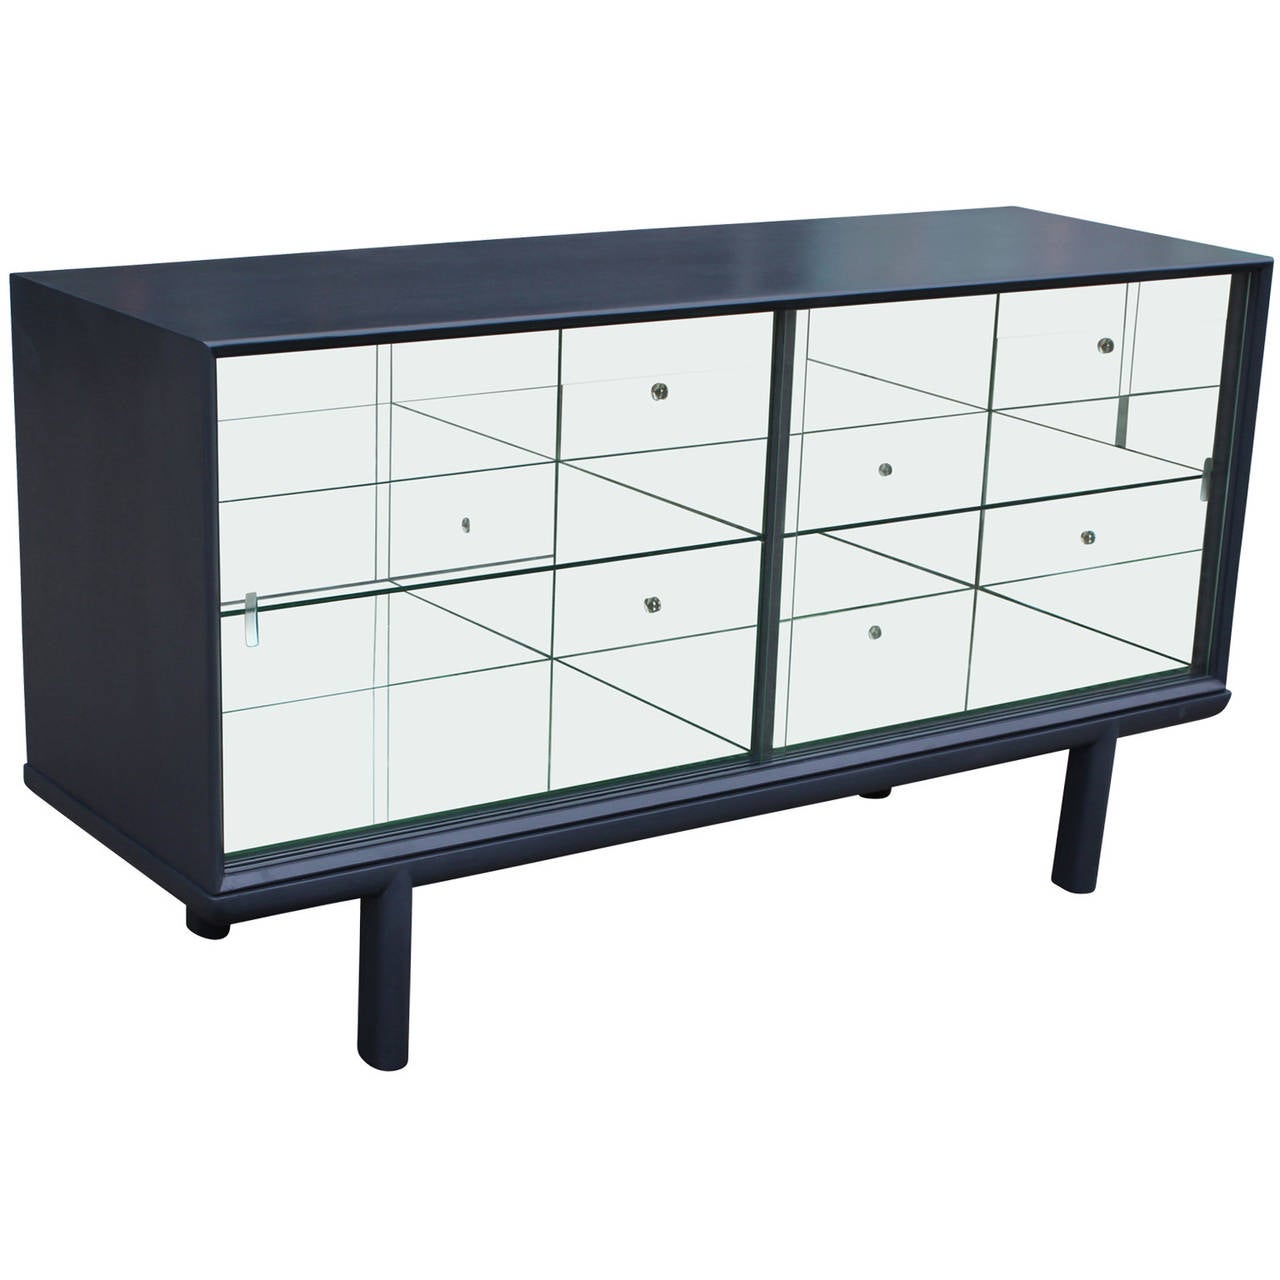 Beautiful grey cabinet or sideboard with glass sliding doors. The inside of the cabinet is lined with mirrors. The shell has been stained in a lovely French blue grey color. Could be used as a display, a server, sideboard, etc. Mirrors can be